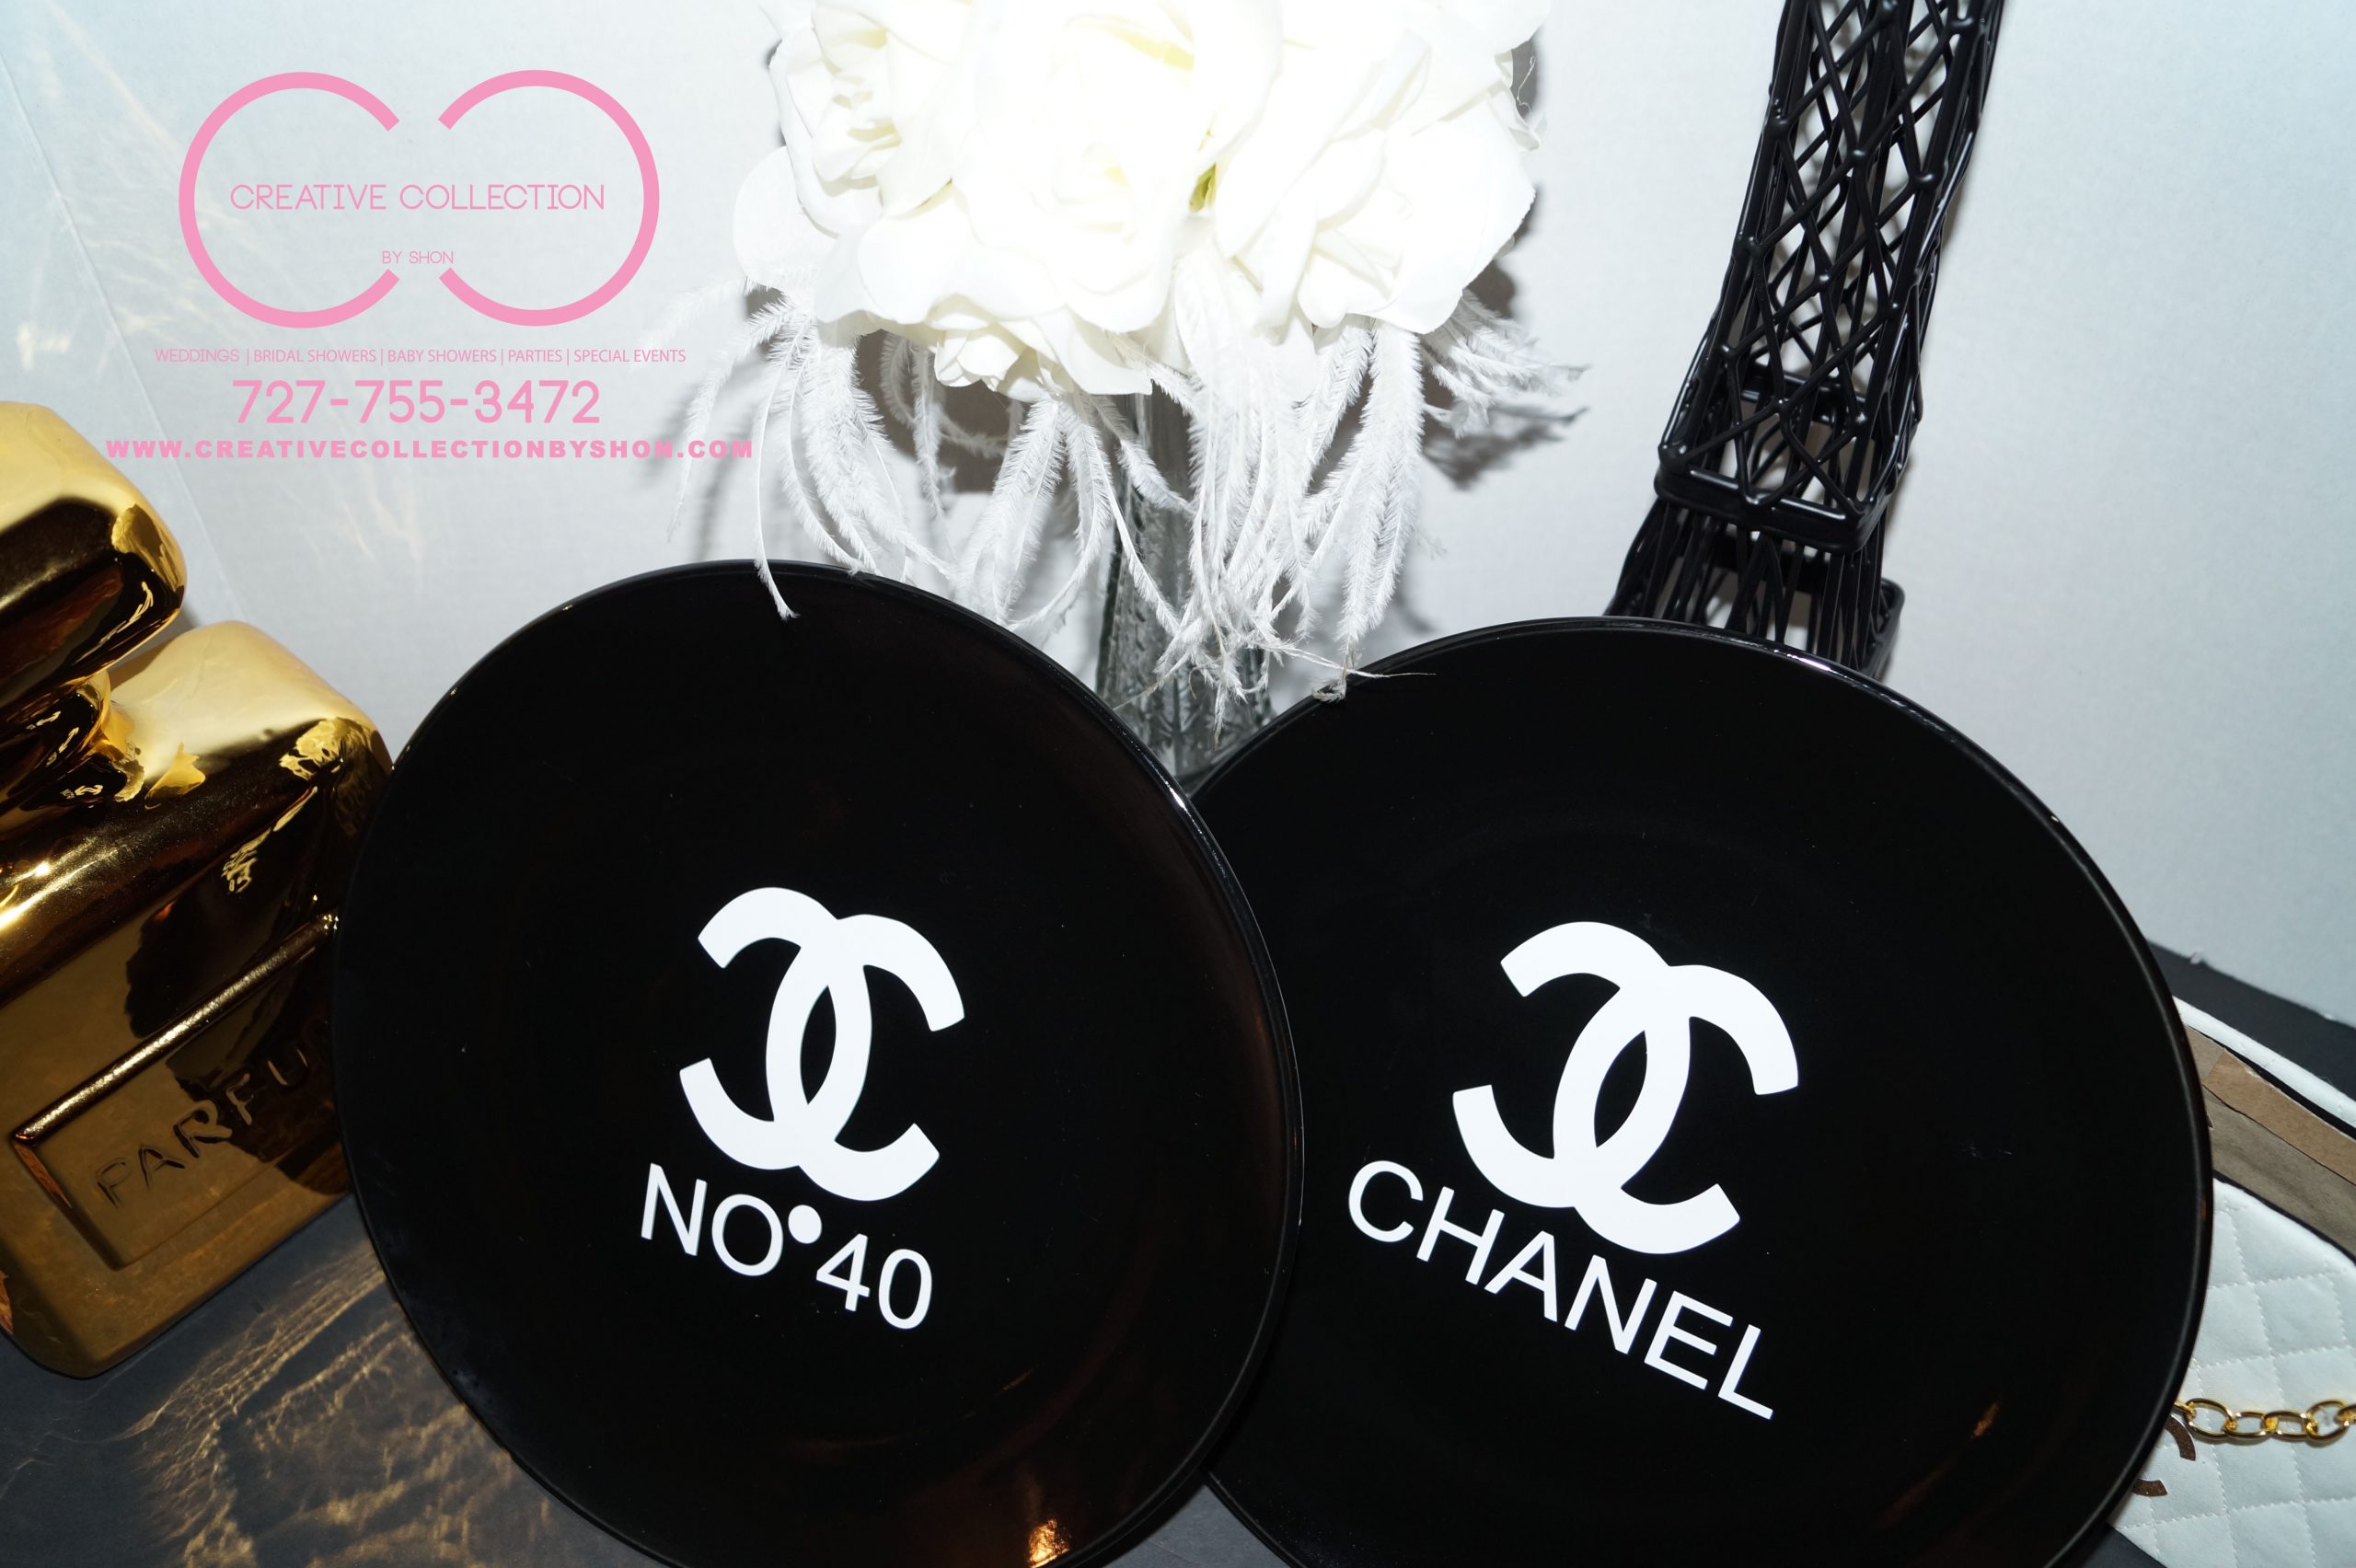 Parisian Inspired Plates – Creative Collection by Shon